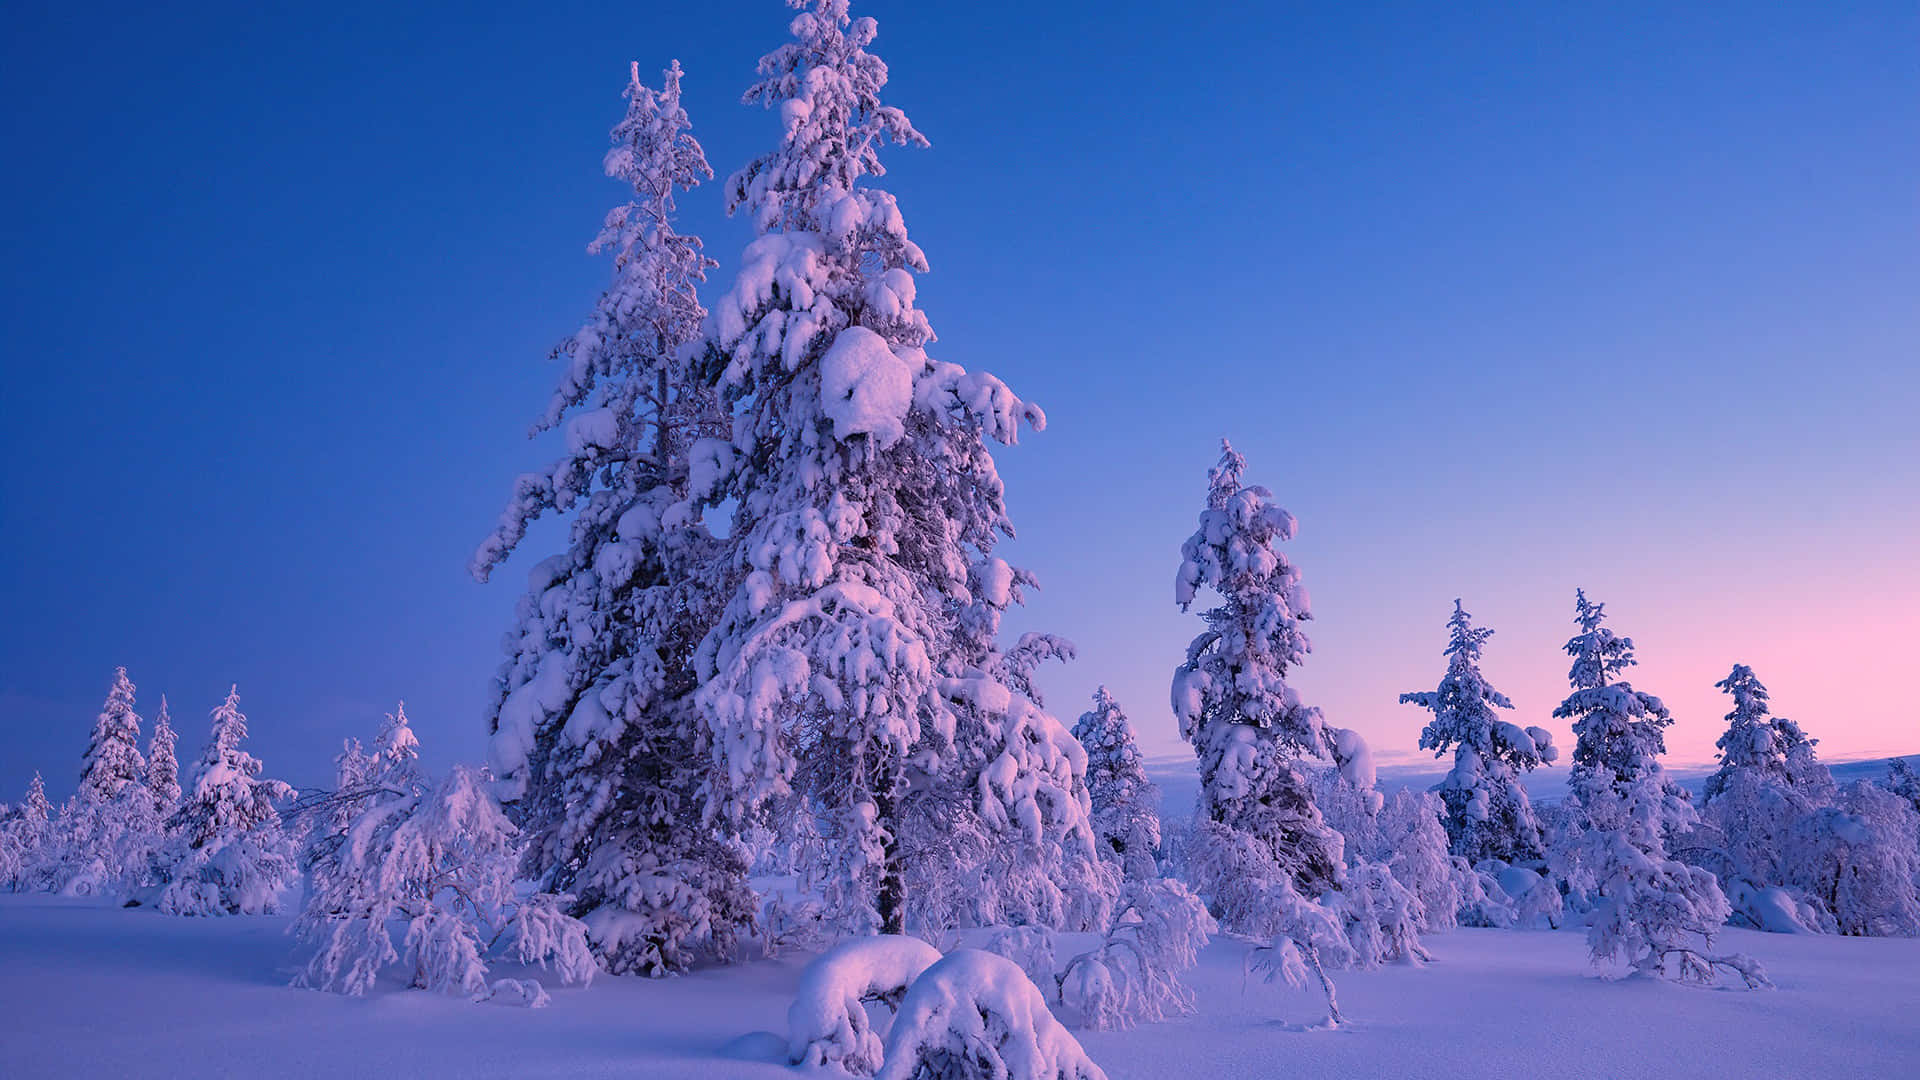 A picturesque winter landscape of snow-covered trees